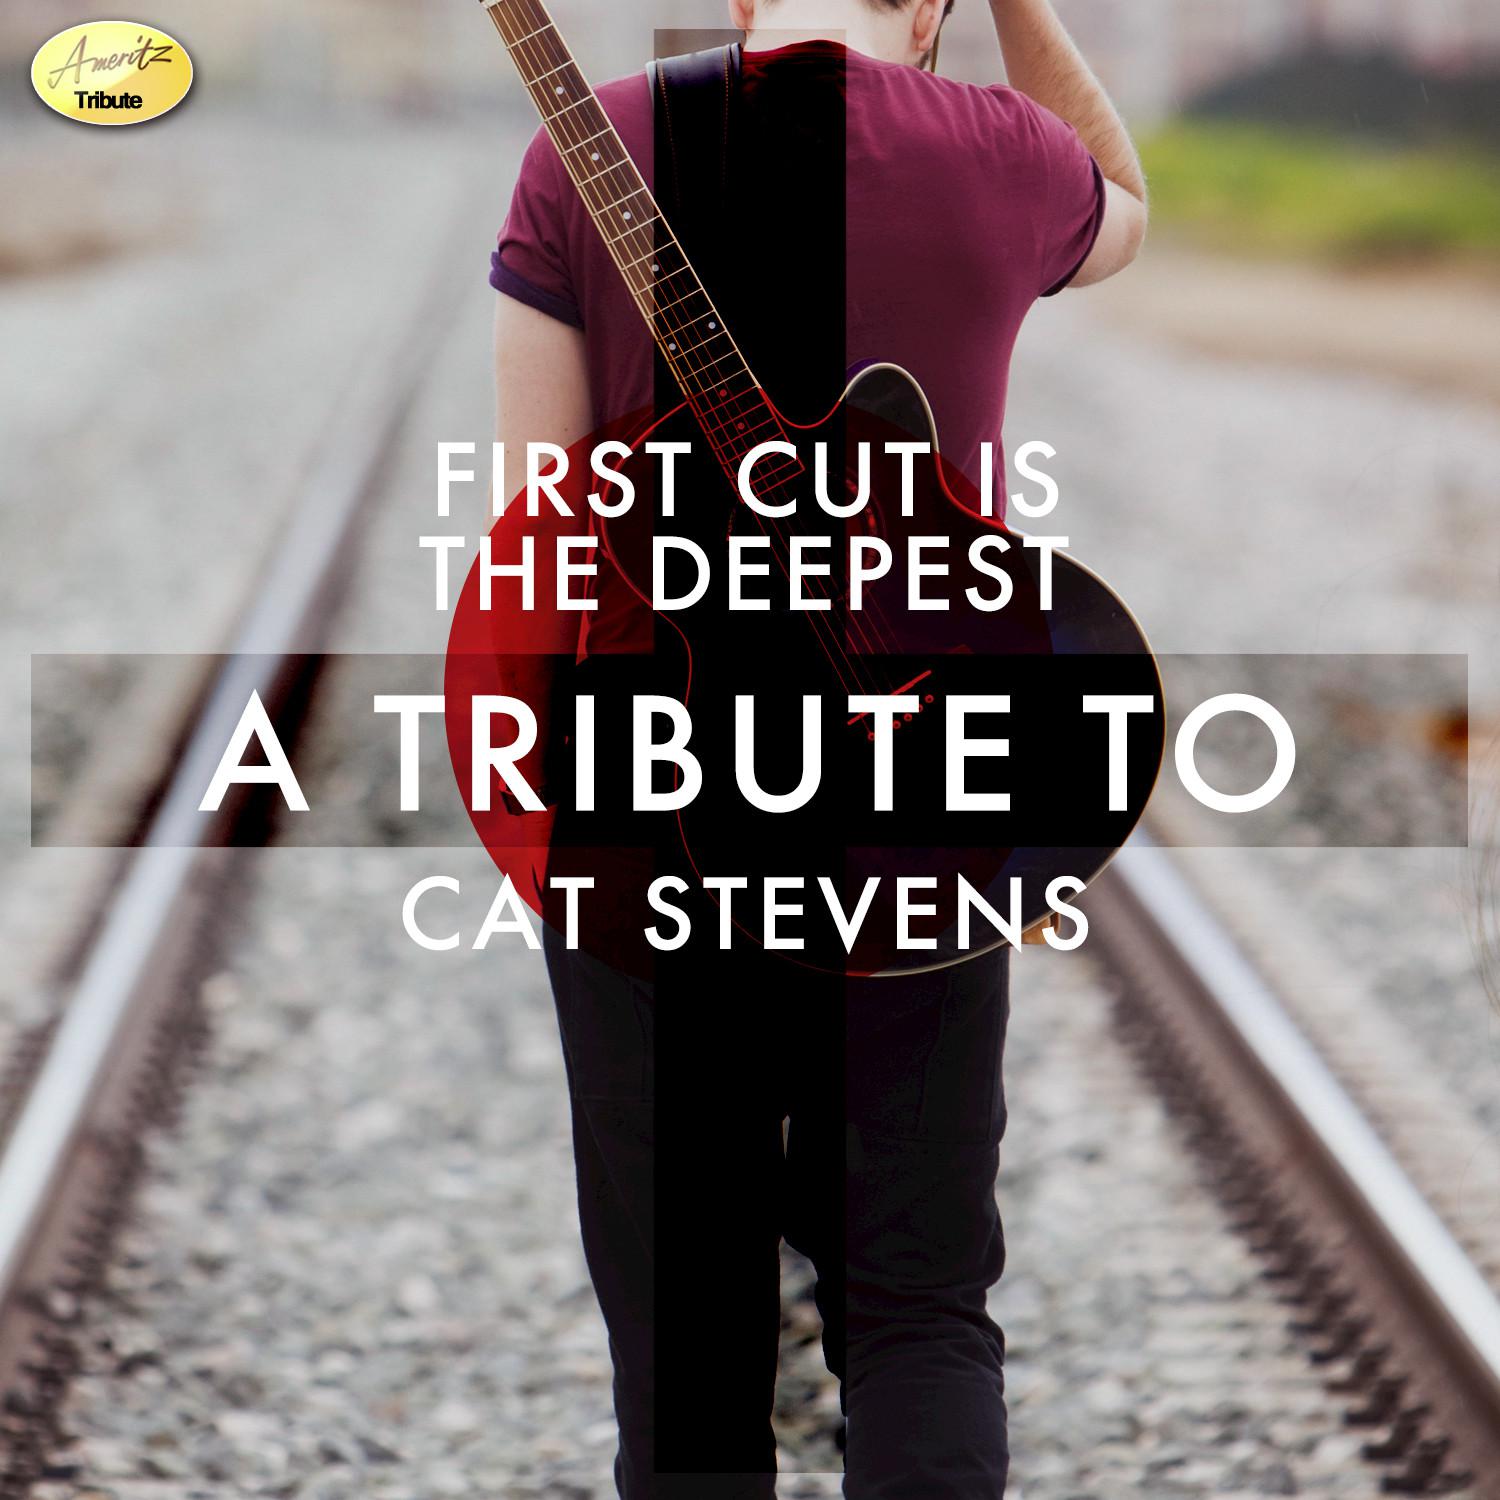 First Cut Is the Deepest - A Tribute to Cat Stevens